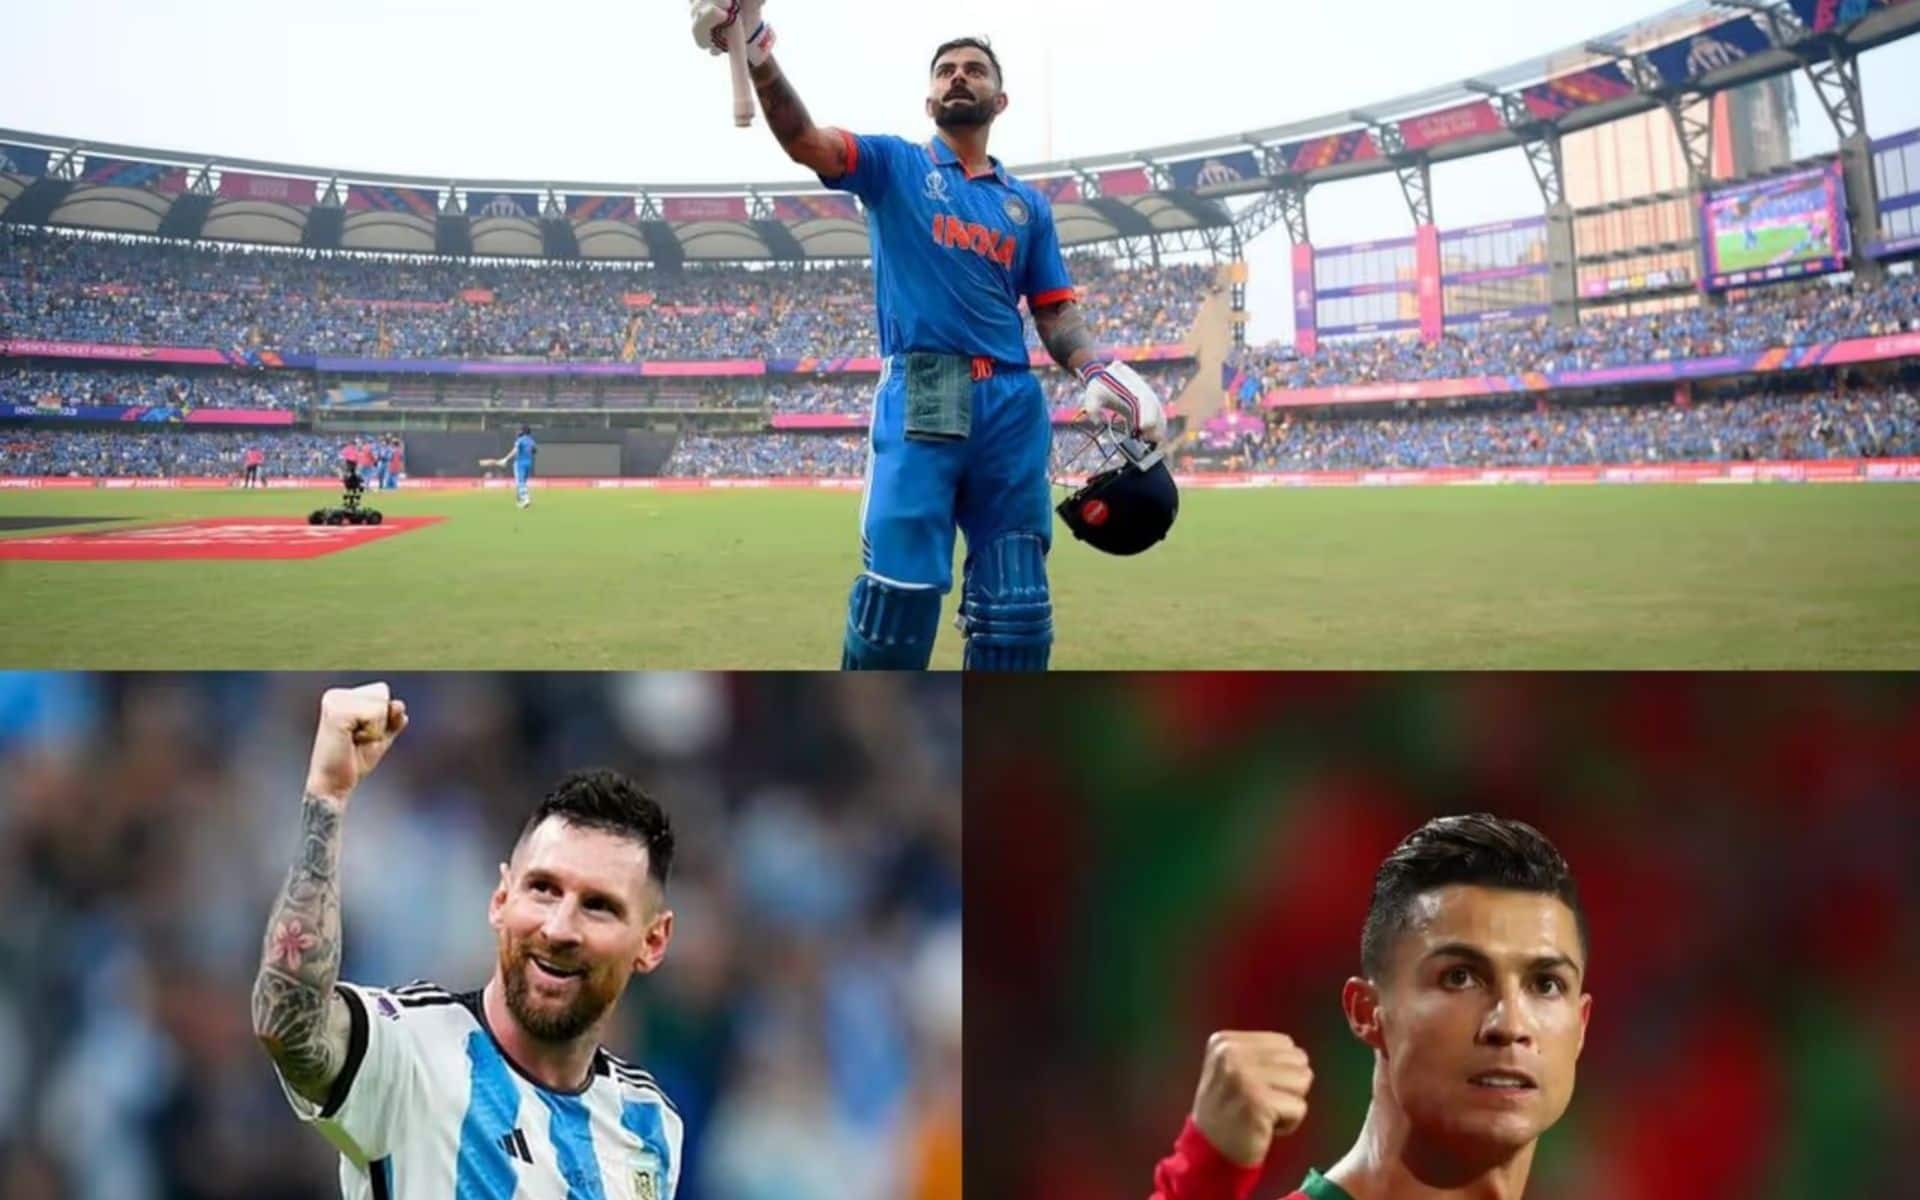 'Kohli Right Up There With Messi & CR7': Kiwi Great's Highest Praise For India's Ace Batter